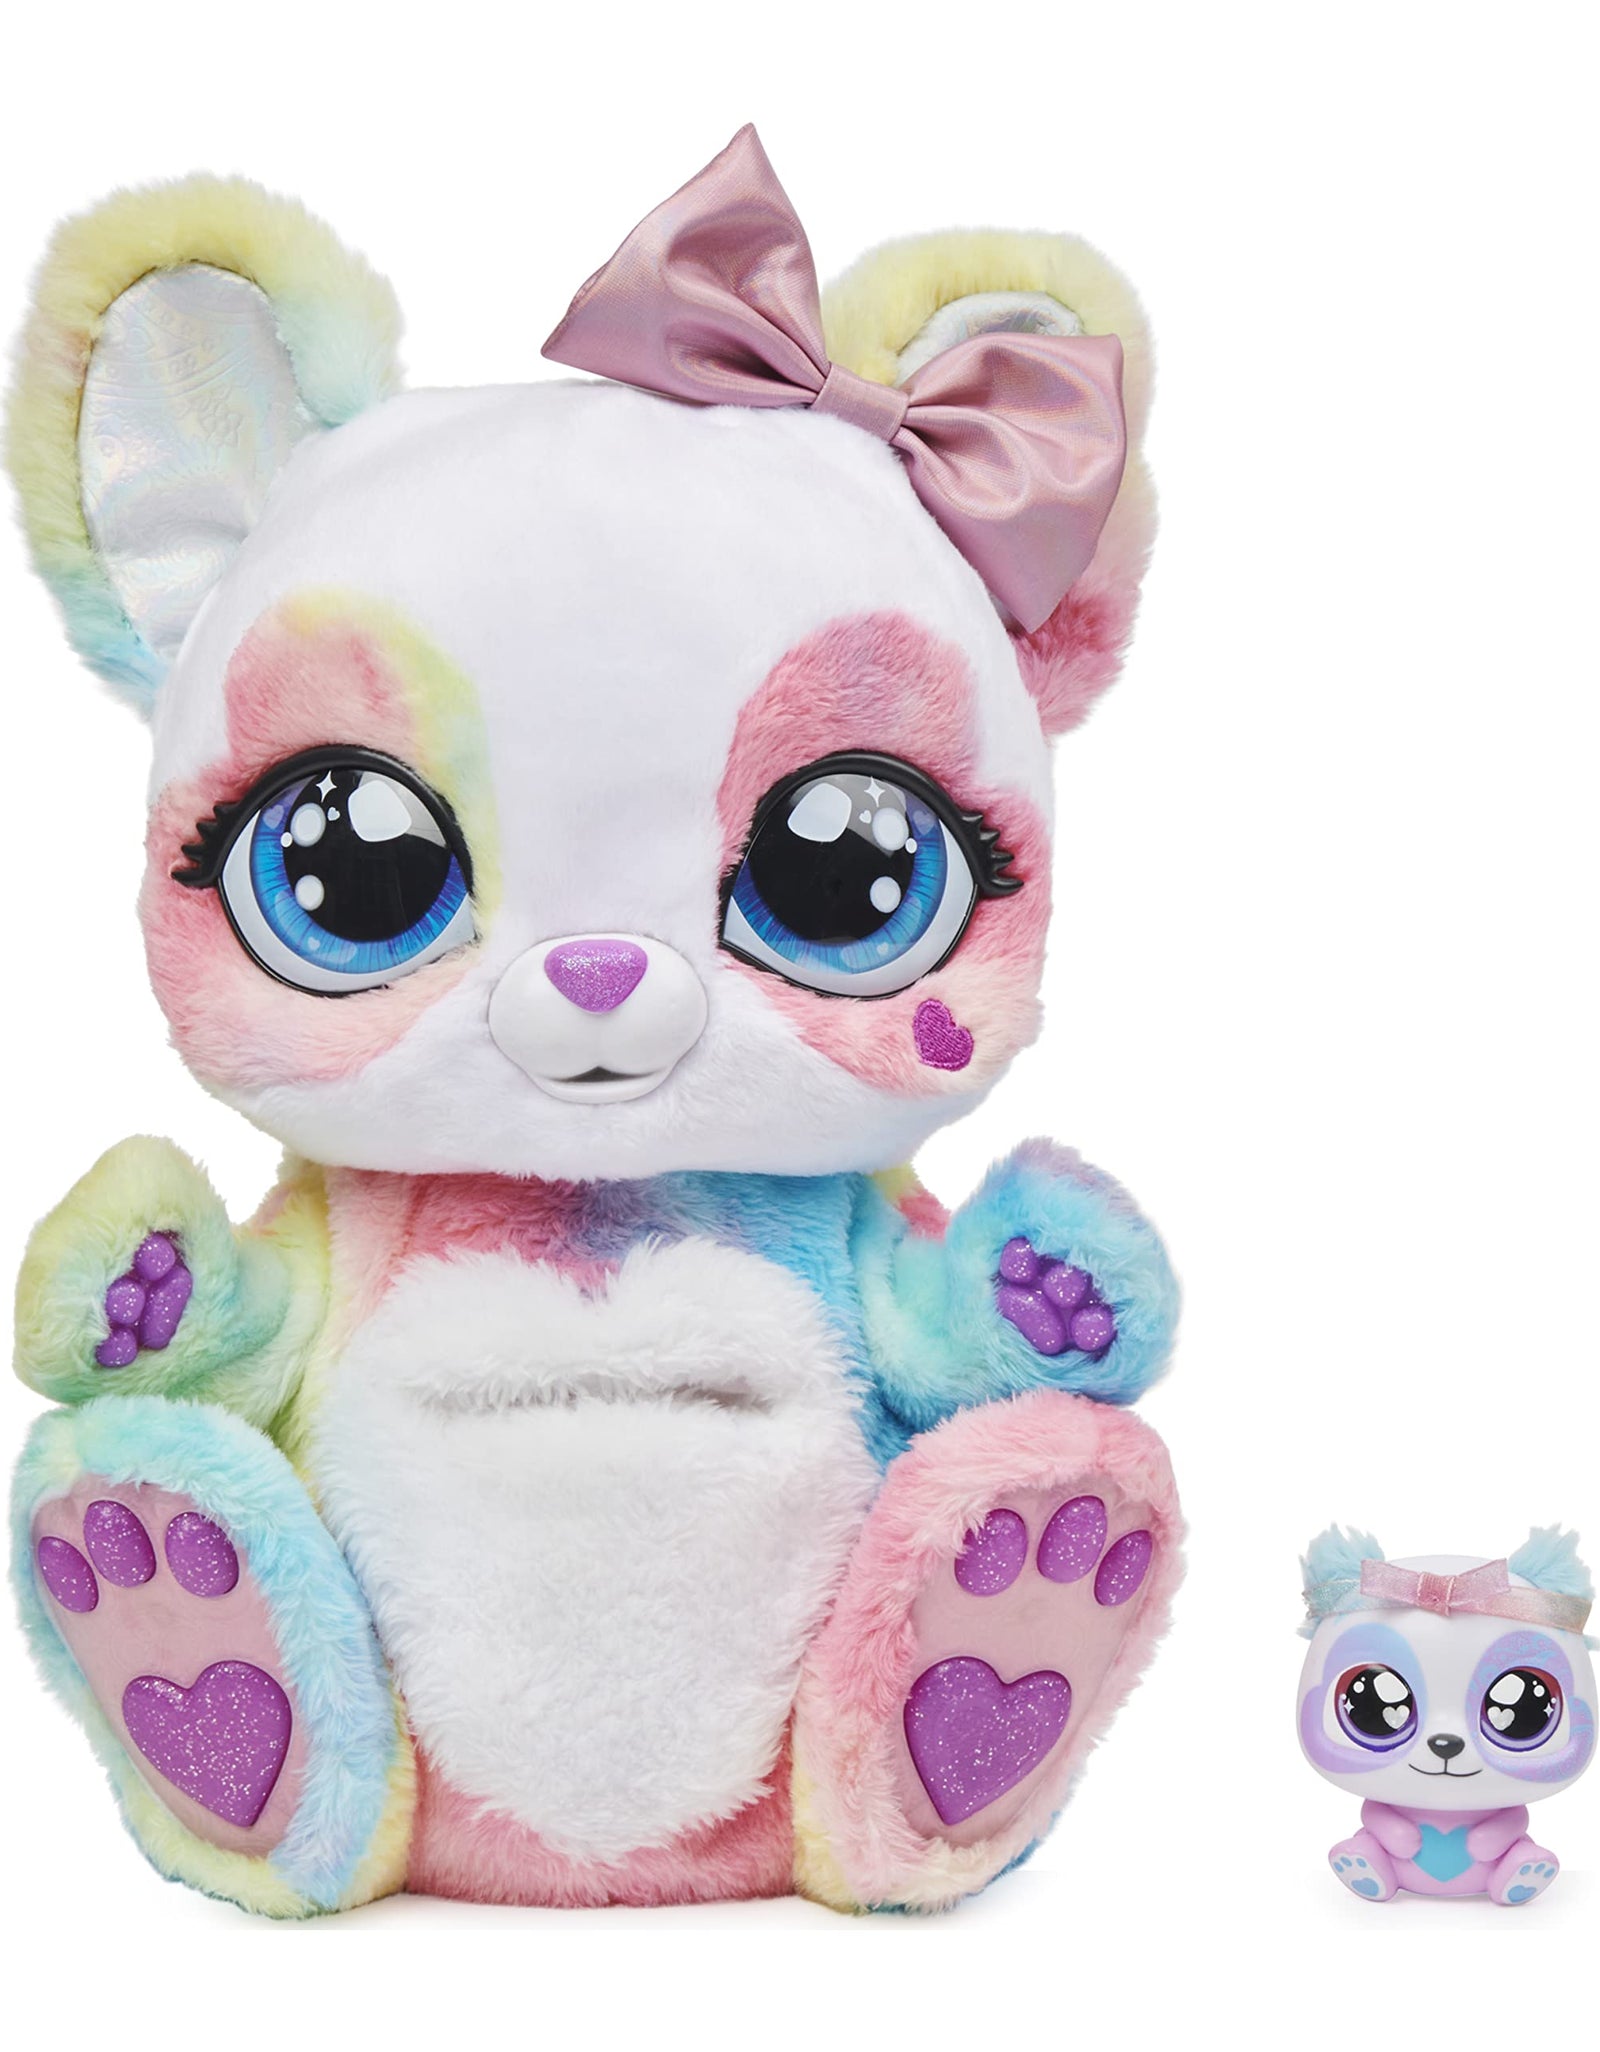 Peek-A-Roo, Interactive Rainbow Plush Toy and Baby with Bonus Bows, Over 150 Sounds & Actions (Amazon Exclusive), Kids Toys for Girls Ages 5 and up